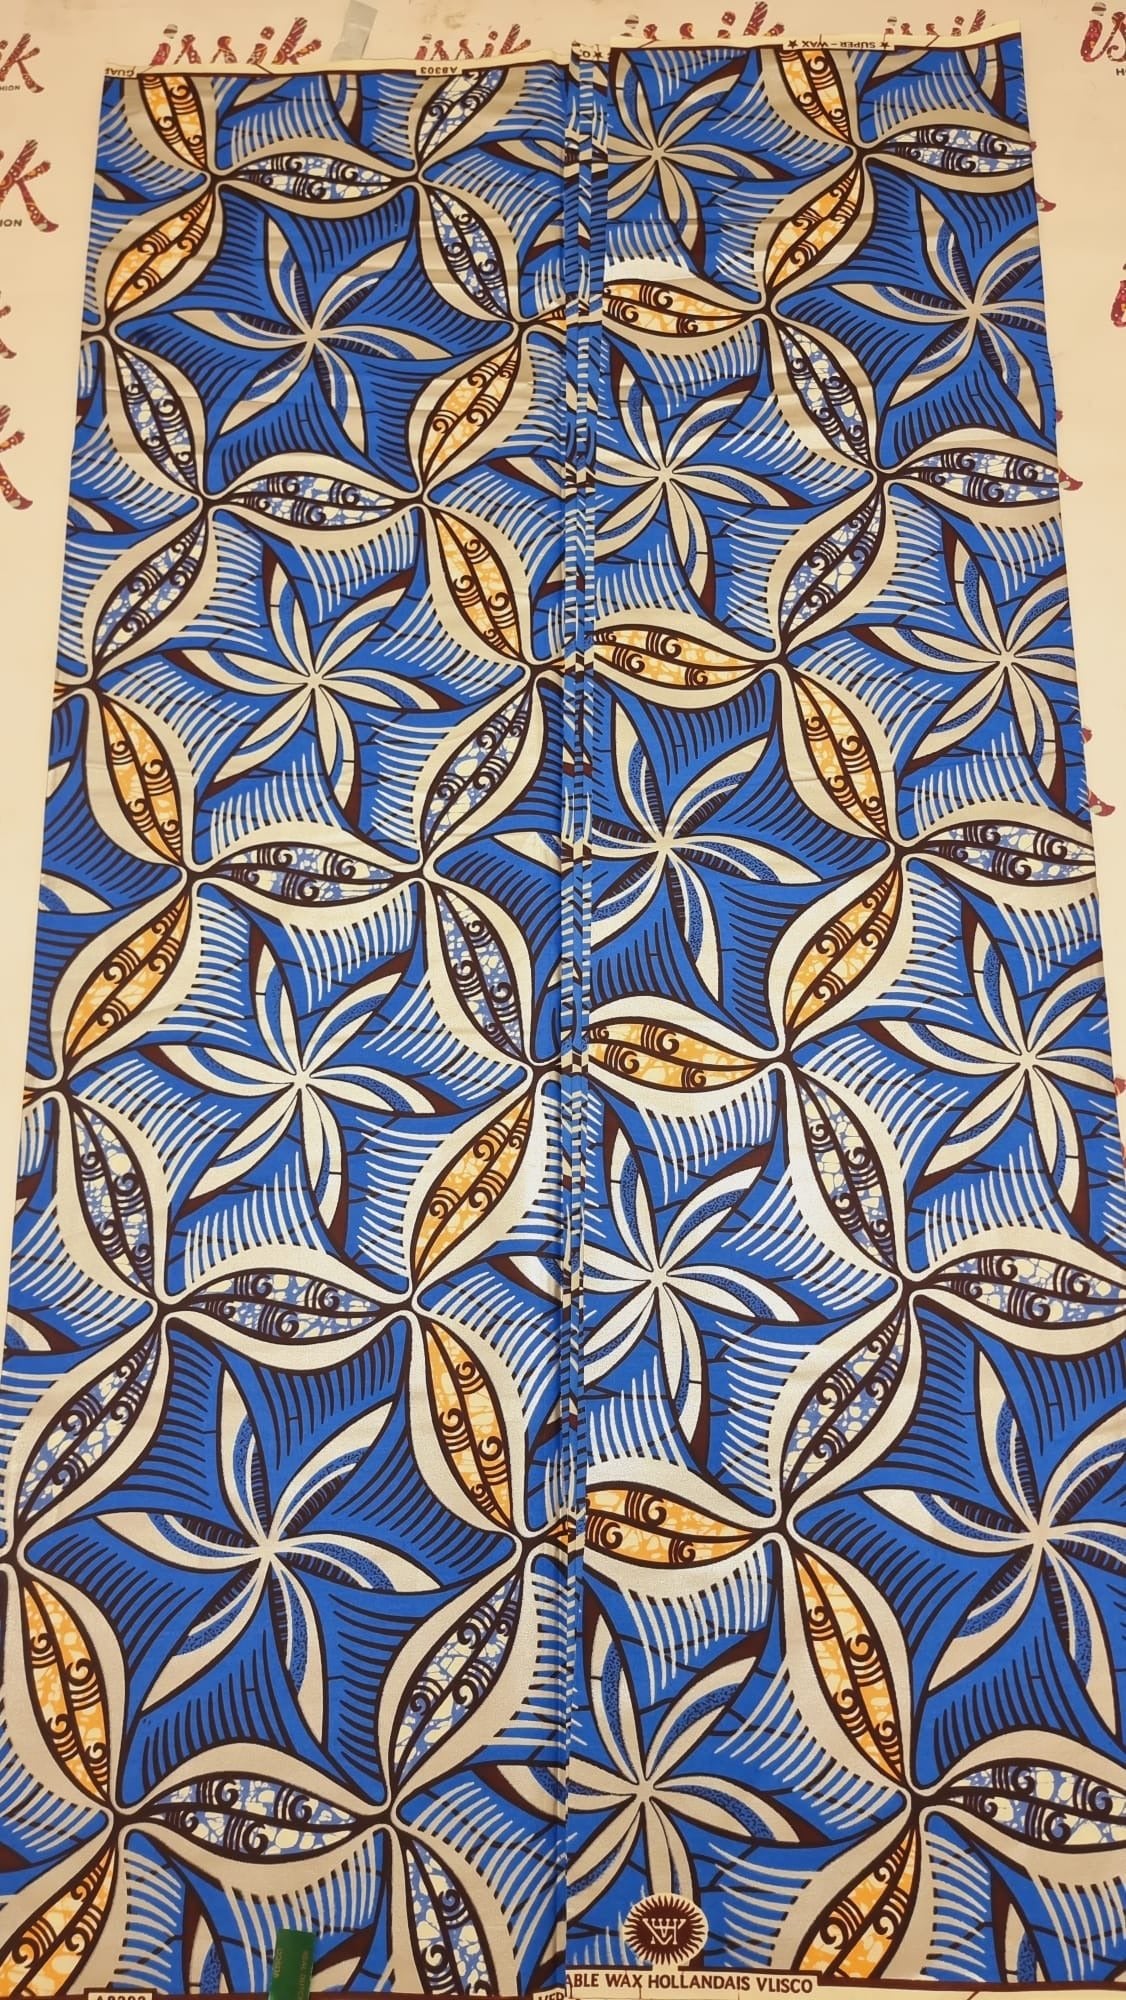 Blue Embellished African Print Fabric - akgld039 - House of Prints